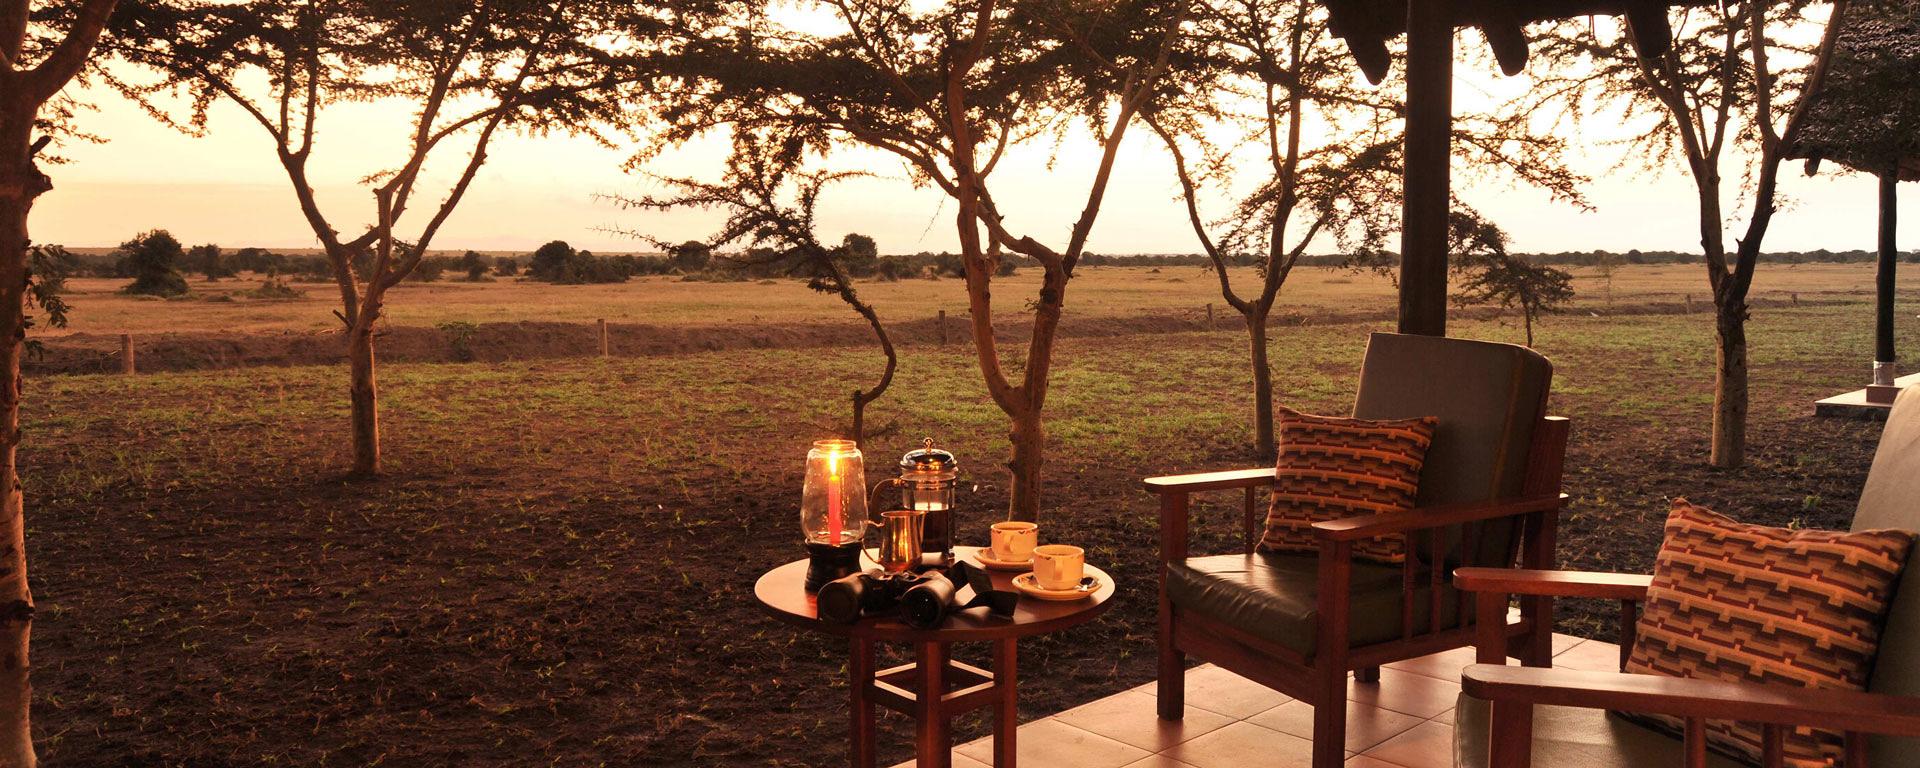 Sweetwaters Serena Camp. Experience Sweetwaters Serena Camp - Book Now